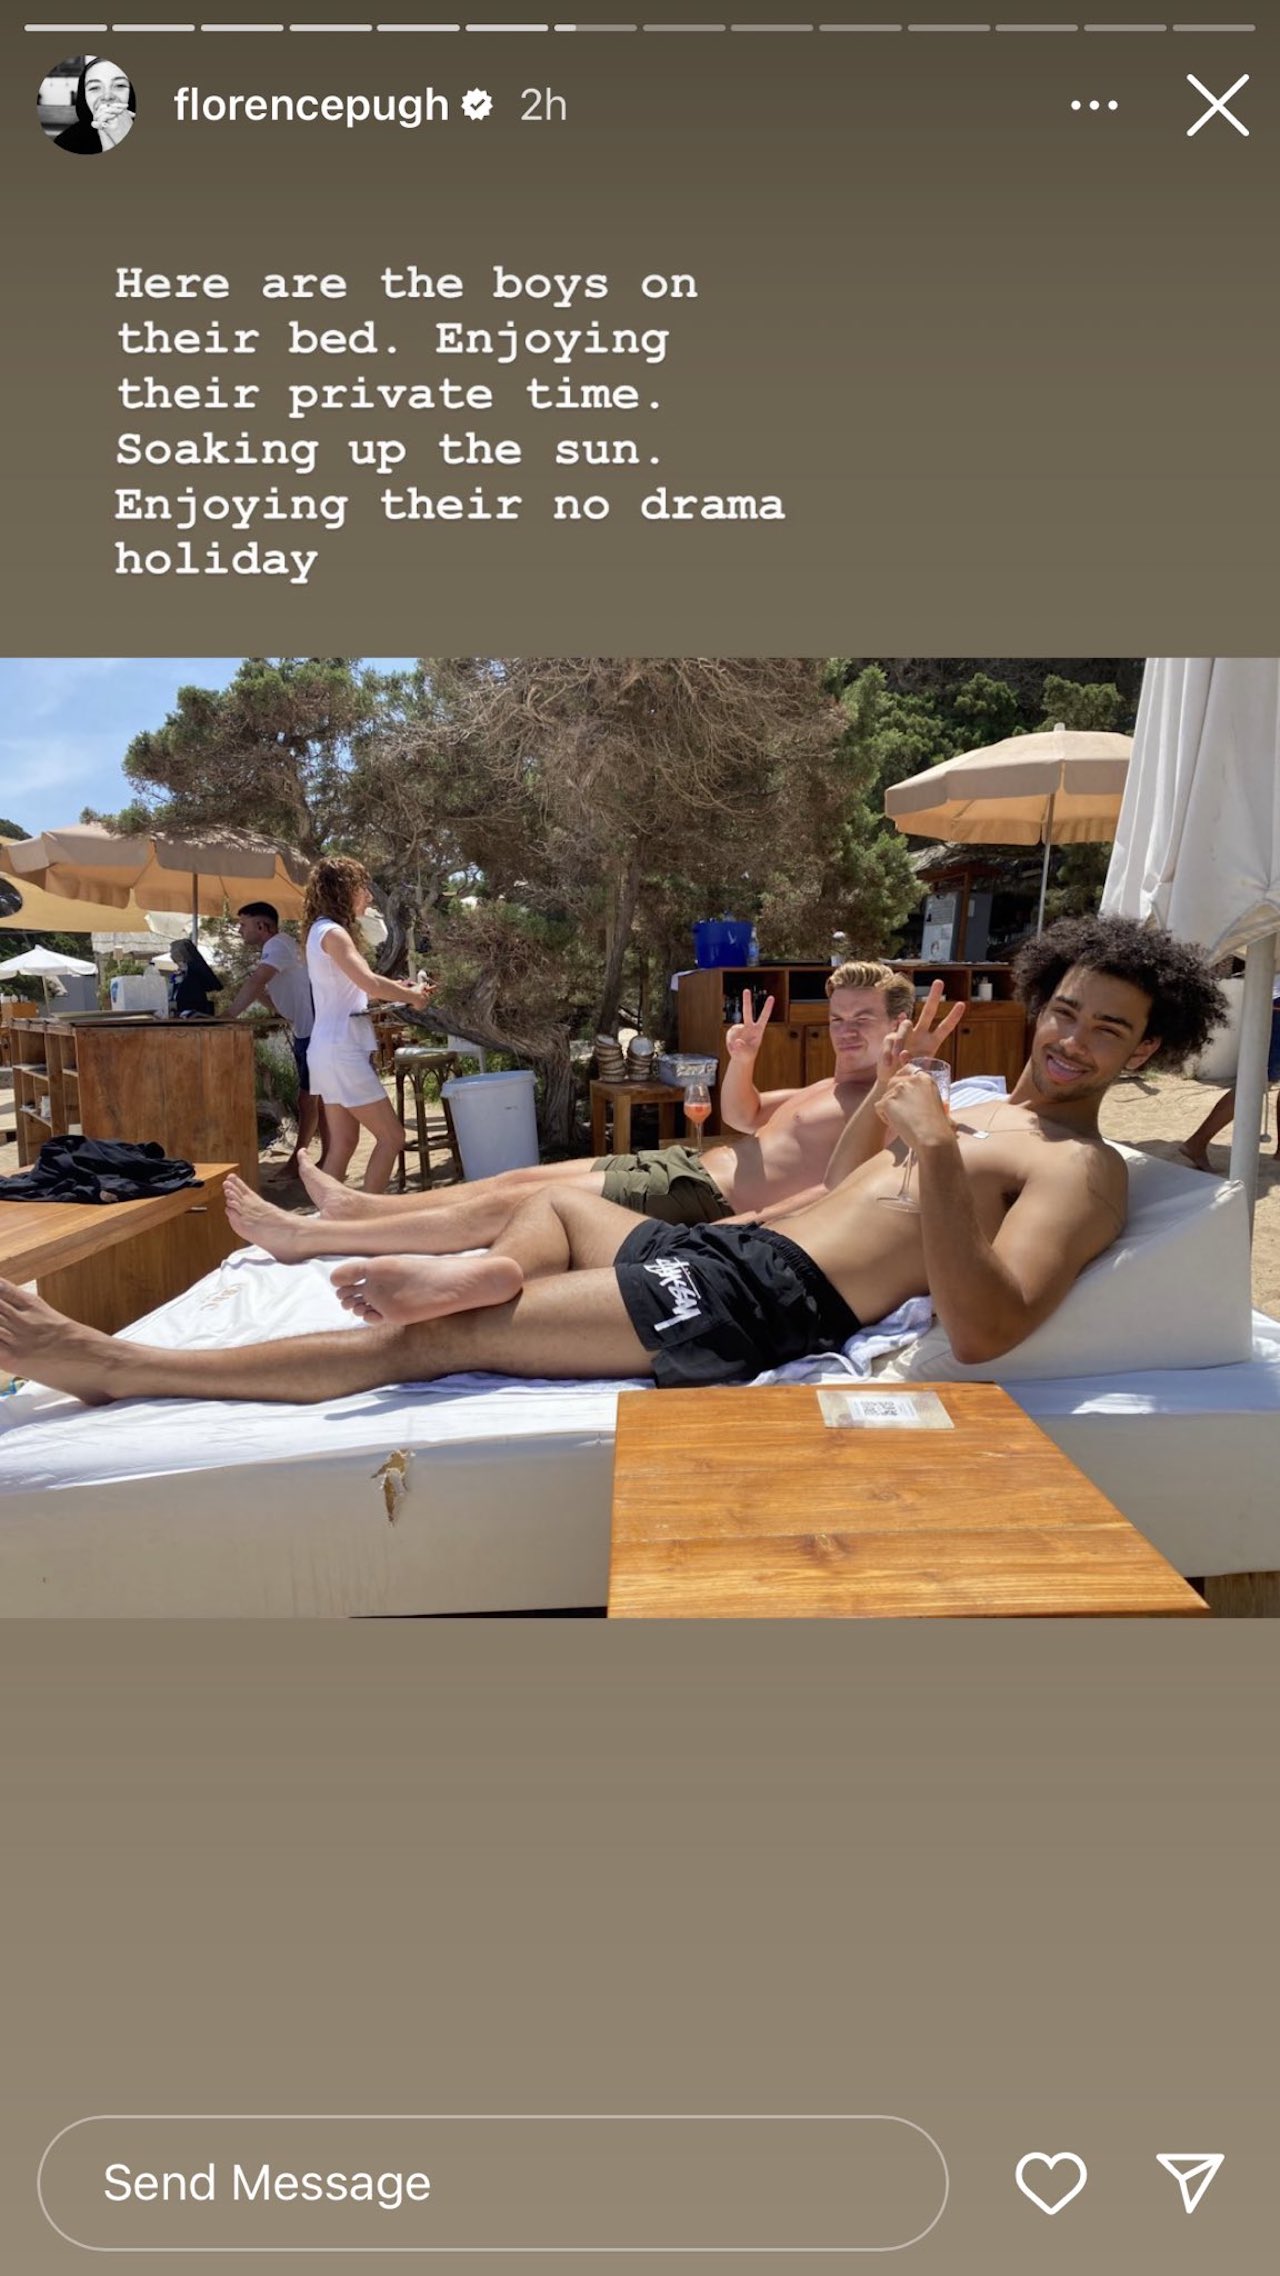 Will Poulter and Archie Madekwe in vacation in Ibiza from Florence Pugh's instagram story